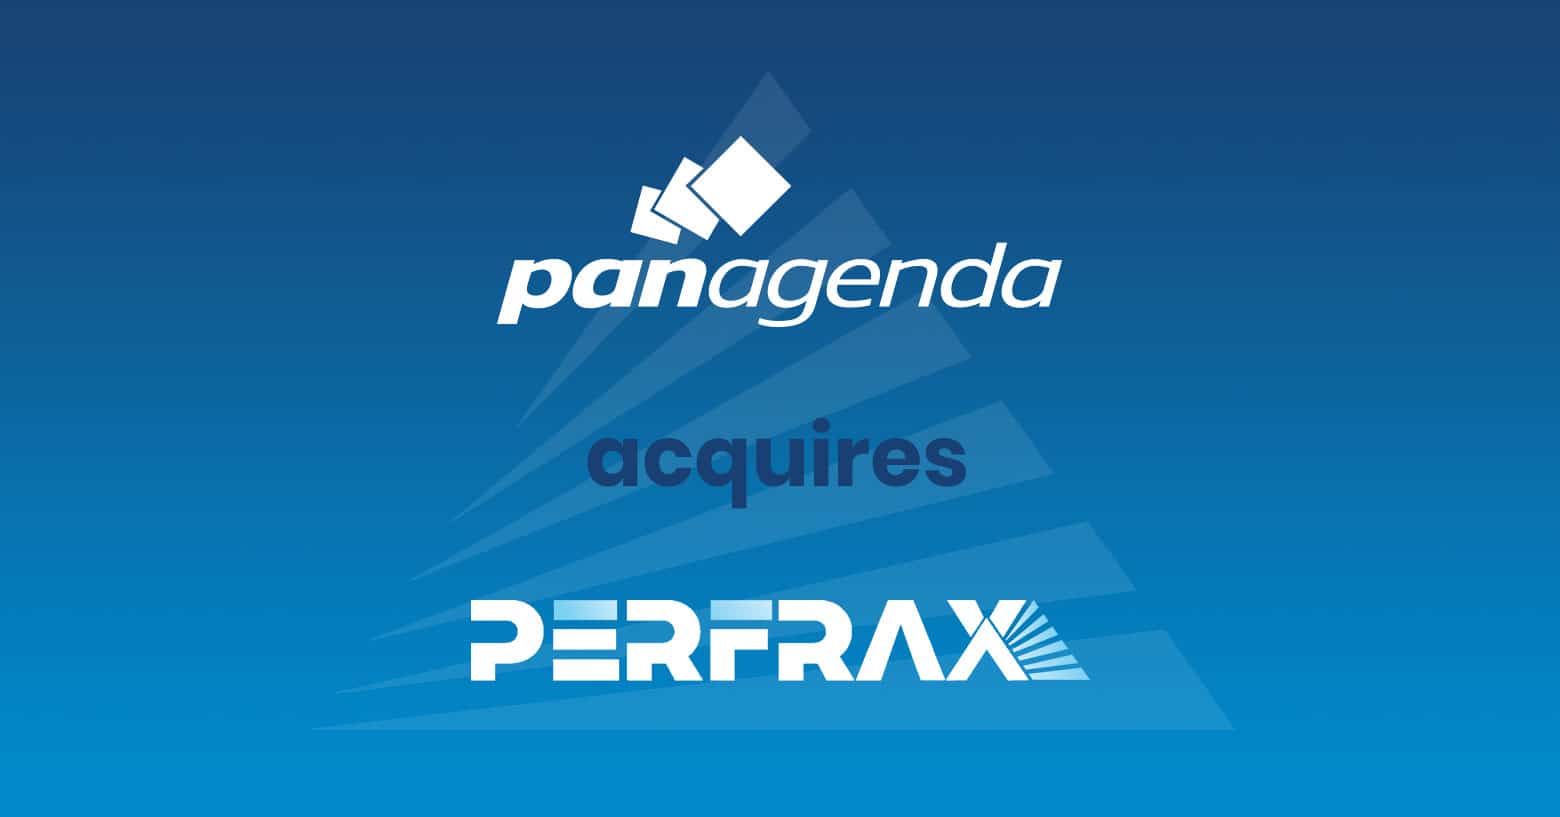 panagenda acquires Perfrax: Creator of ground-breaking User Experience Monitoring and Microsoft Teams Call Quality Analytics